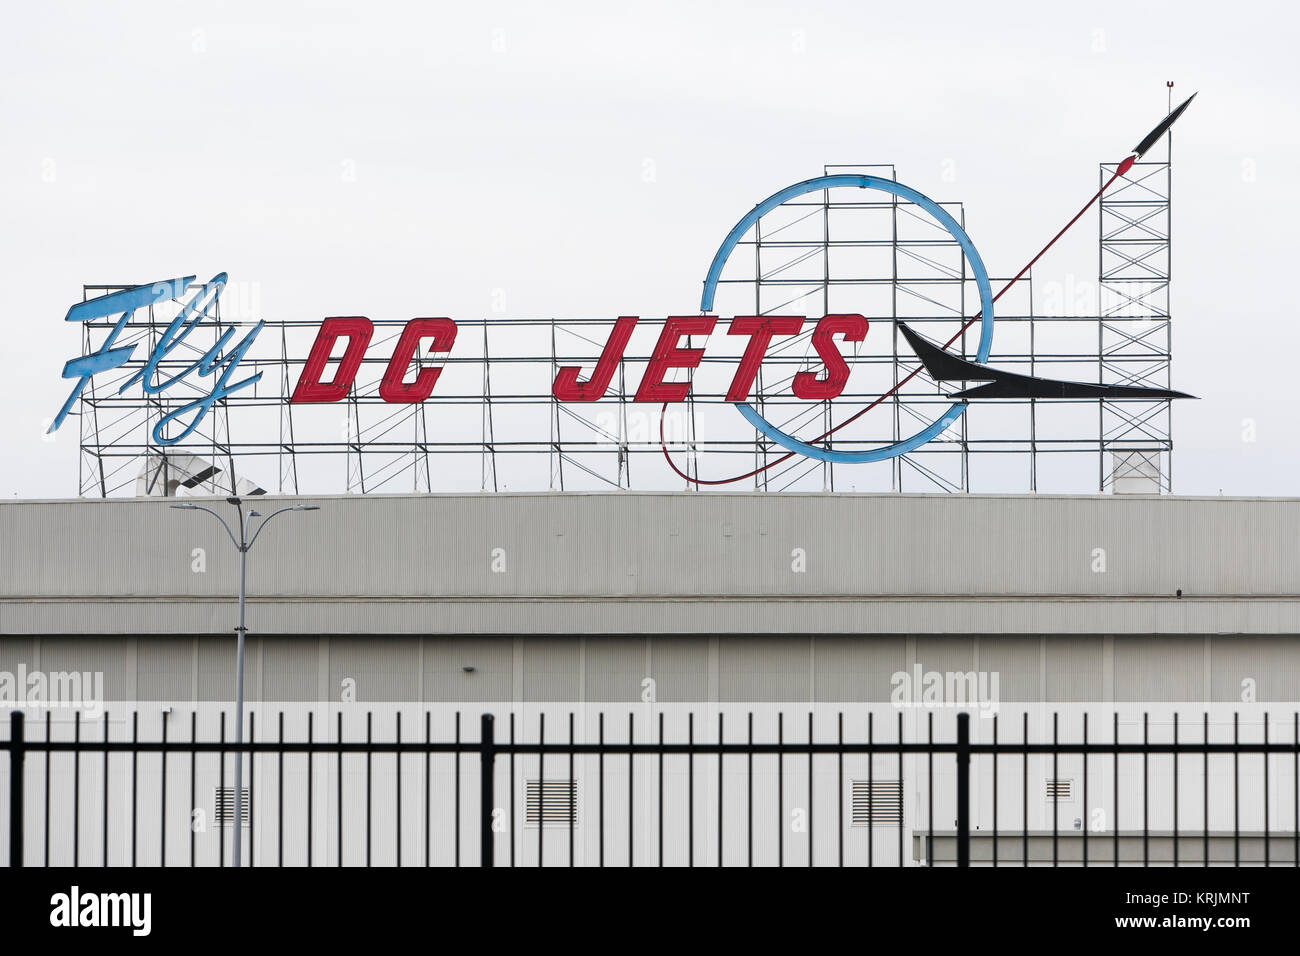 A 'Fly DC Jets' neon logo sign outside of the former Boeing 717 Jet Aircraft factory in Long Beach, California, on December 10, 2017. Stock Photo